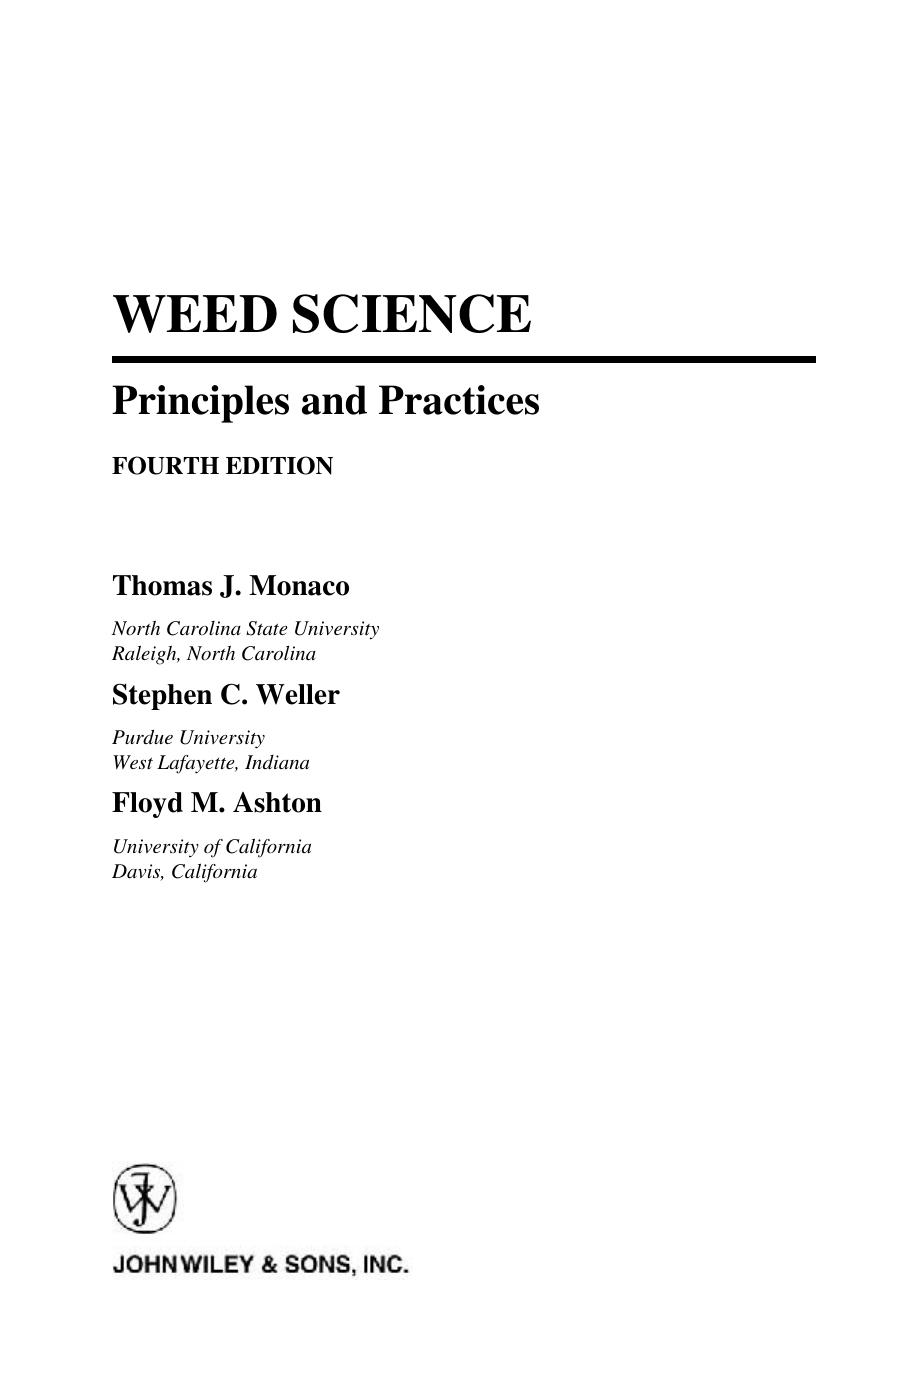 Weed Science: Principles and Practices, 4th Edition